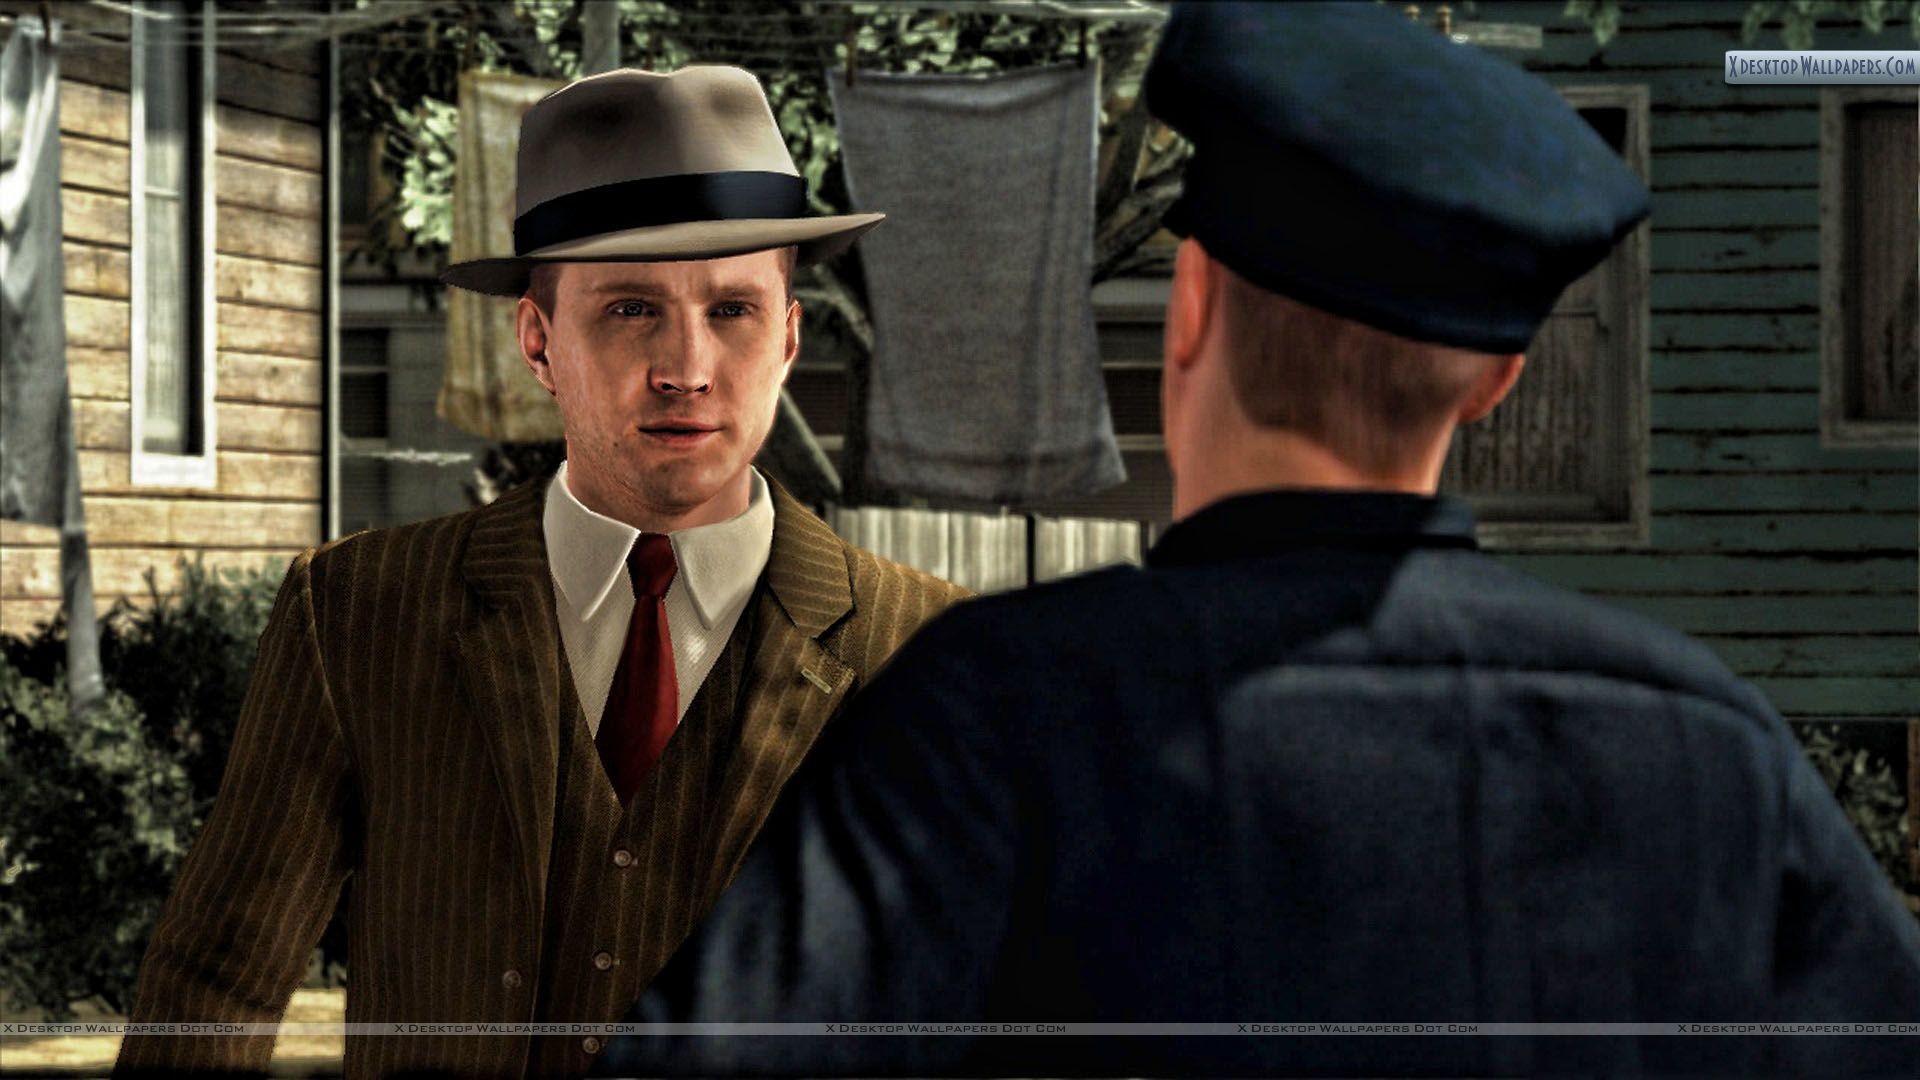 1920x1080 L.A. Noire Talking With Police Officer Download 31 ...